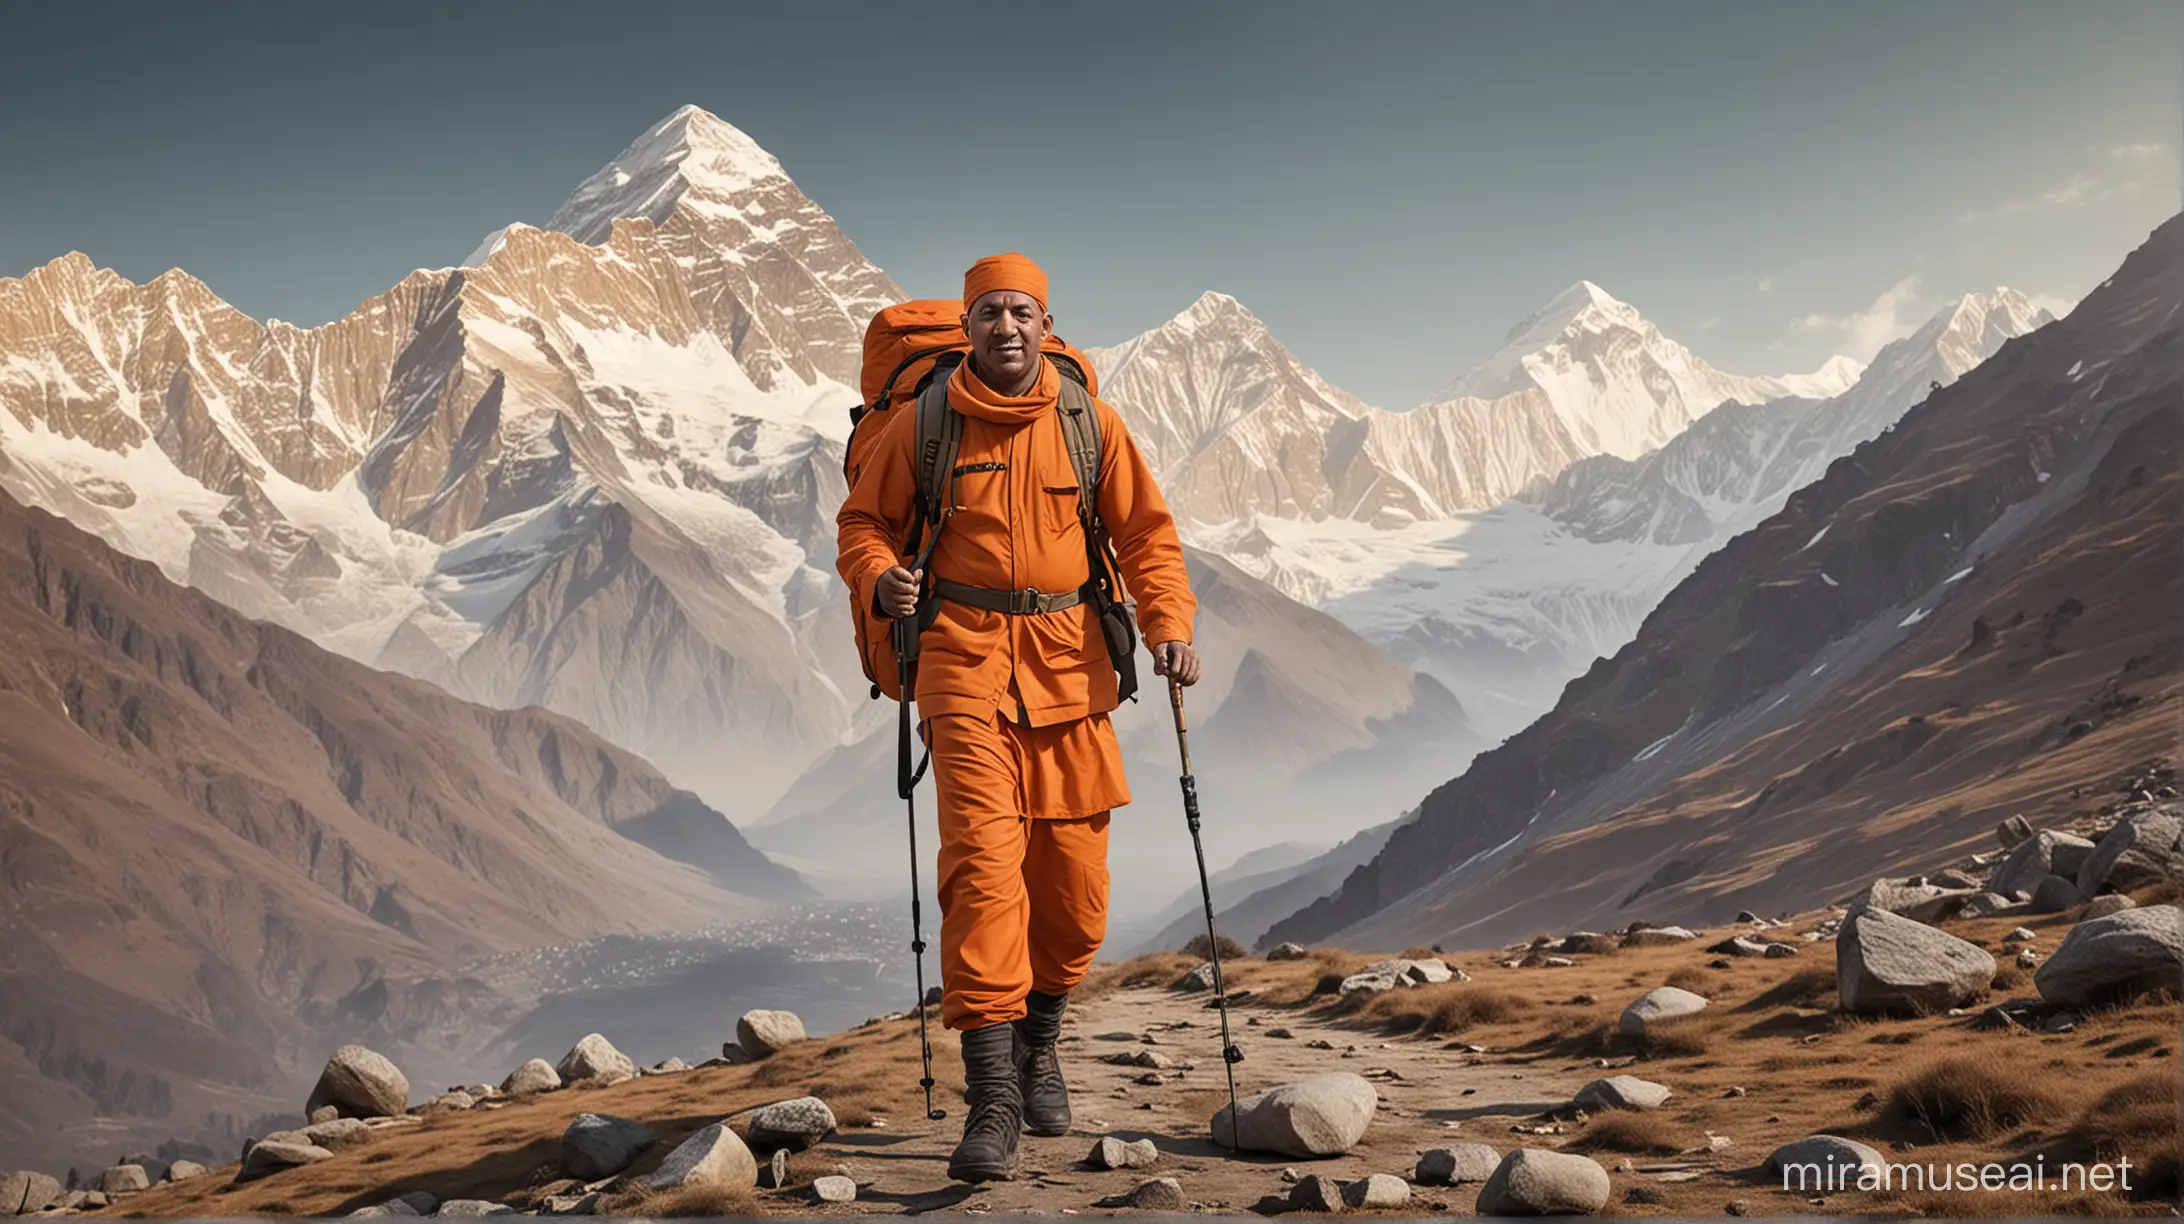 Create a realistic AI image of the uttar pradesh chief minister yogi adityanath going for trekking in the Himalayas. Show the yogi adityanath dressed in trekking attire, wearing a orange backpack and carrying a trekking pole. Include a orange water bottle hanging from the backpack, indicating preparedness for the trek. Capture the majestic Himalayan landscape in the background, emphasizing the adventurous spirit and love for nature